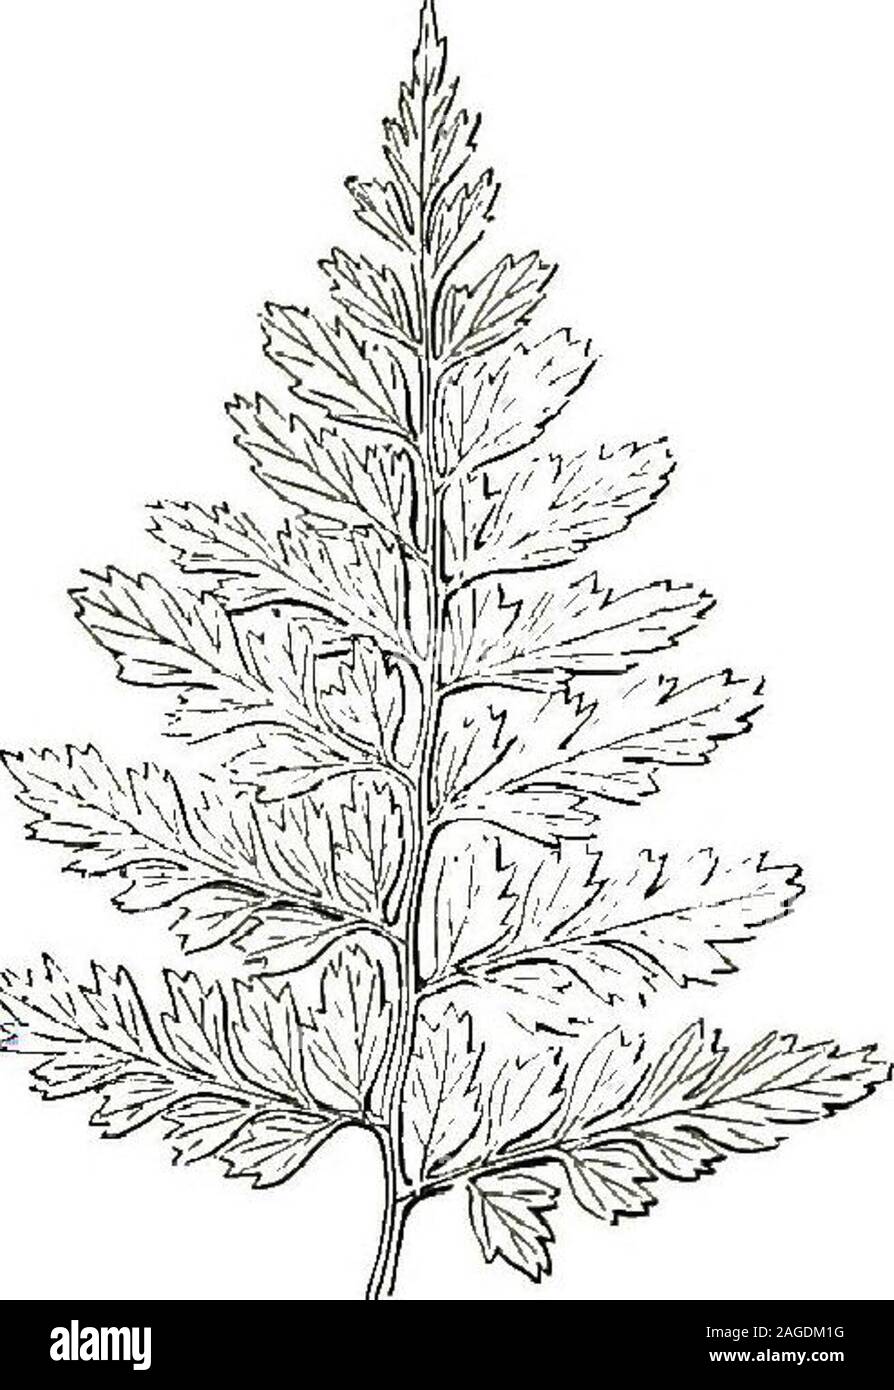 . British ferns and their varieties. ar habitats to those 74 BRITISH FERNS tenanted by its near relative, the Black Maiden-hair Spleenwort (Asp. adiantum nigrum), from which it mainly differs in the nar-rower lance-shaped outline of itsfronds, and the somewhat differentcutting of its pinnae, which are moreregular in size. It does not lenditself easily to cultivation. It partakesa little of the tenderness of its constantneighbour Asp. marinum, and is farmore common abroad in warmerclimates. Fig. 32 represents only the tip ofa frond. It has not been generousin varieties, and although several are Stock Photo